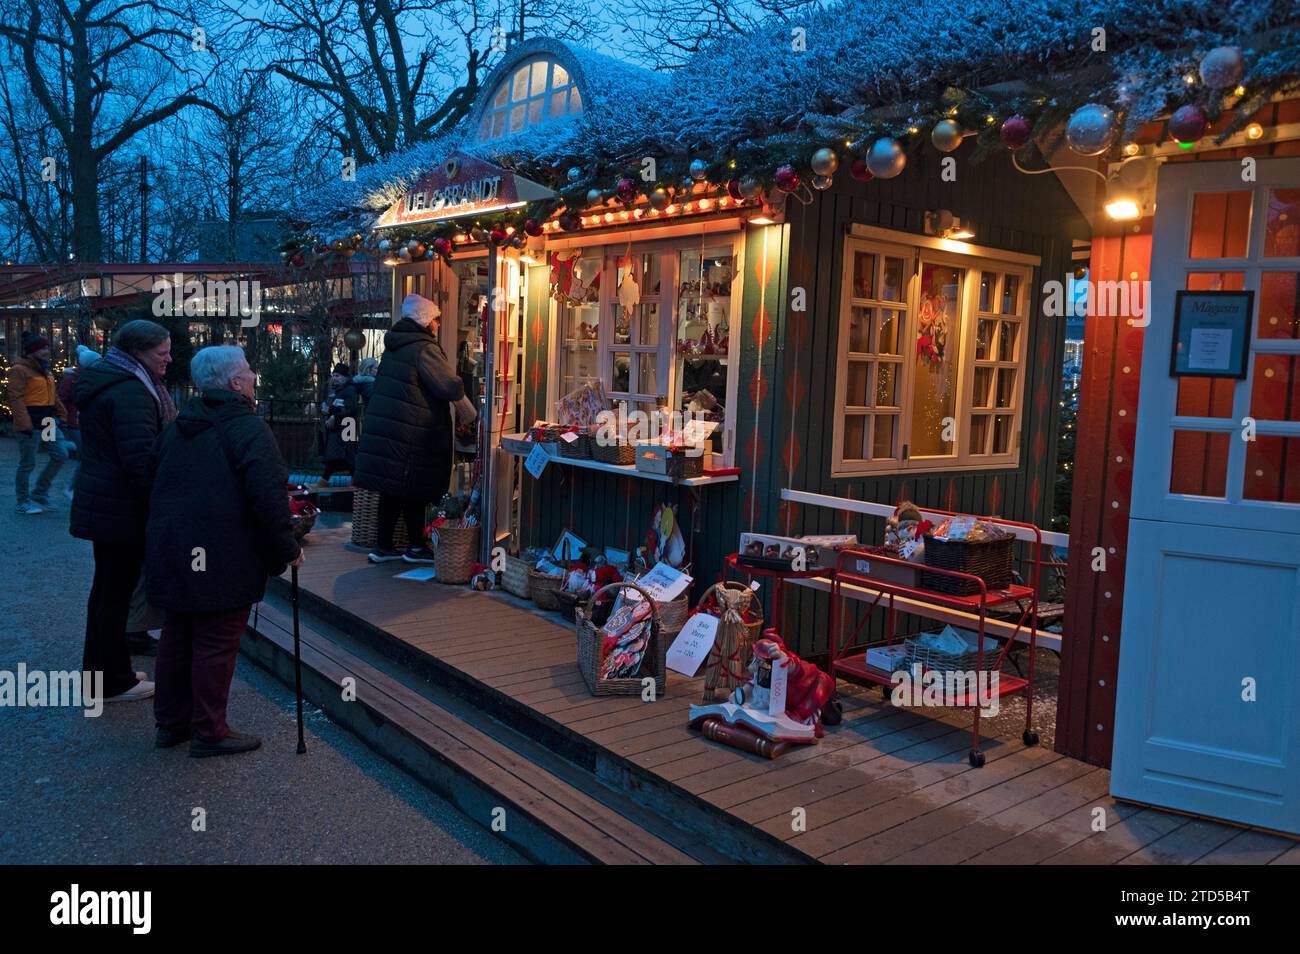 Crowds meander around the small shops in Tivoli Gardens, Christmas shopping and enjoying the festival lights as part of the Julemarked (Christmas mark Stock Photo